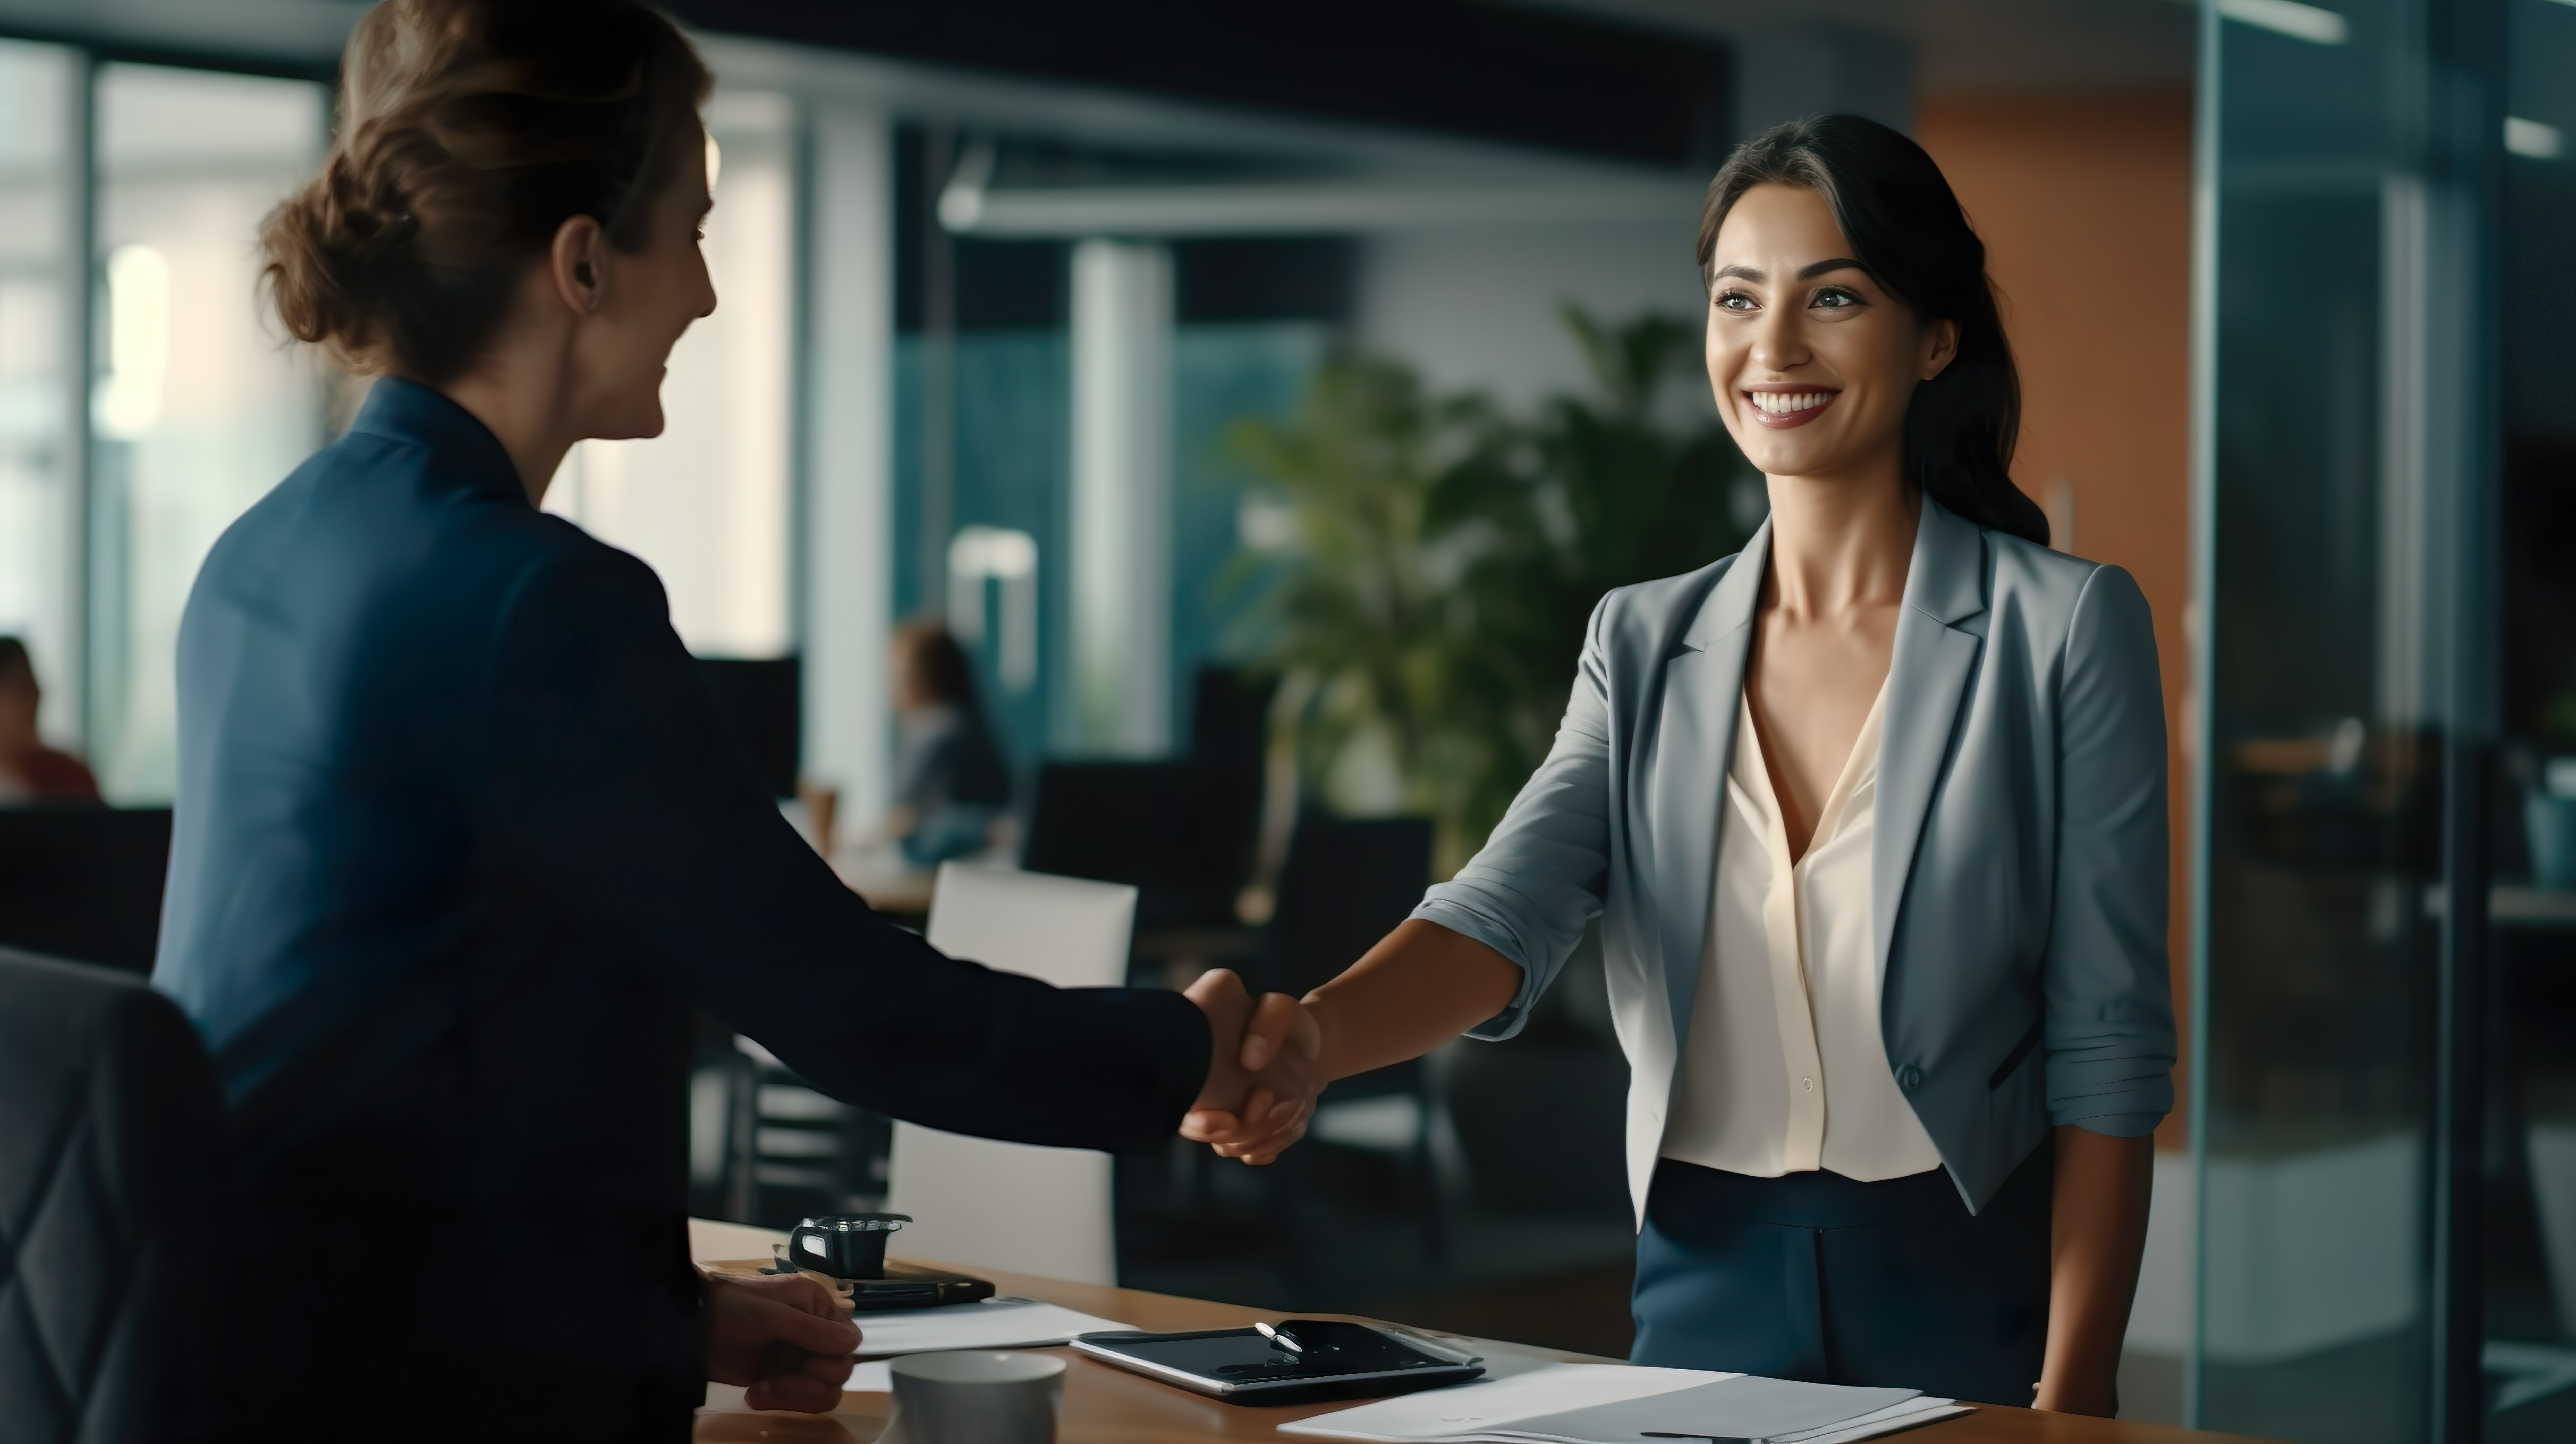 two women shaking hands and smiling wearing business attire